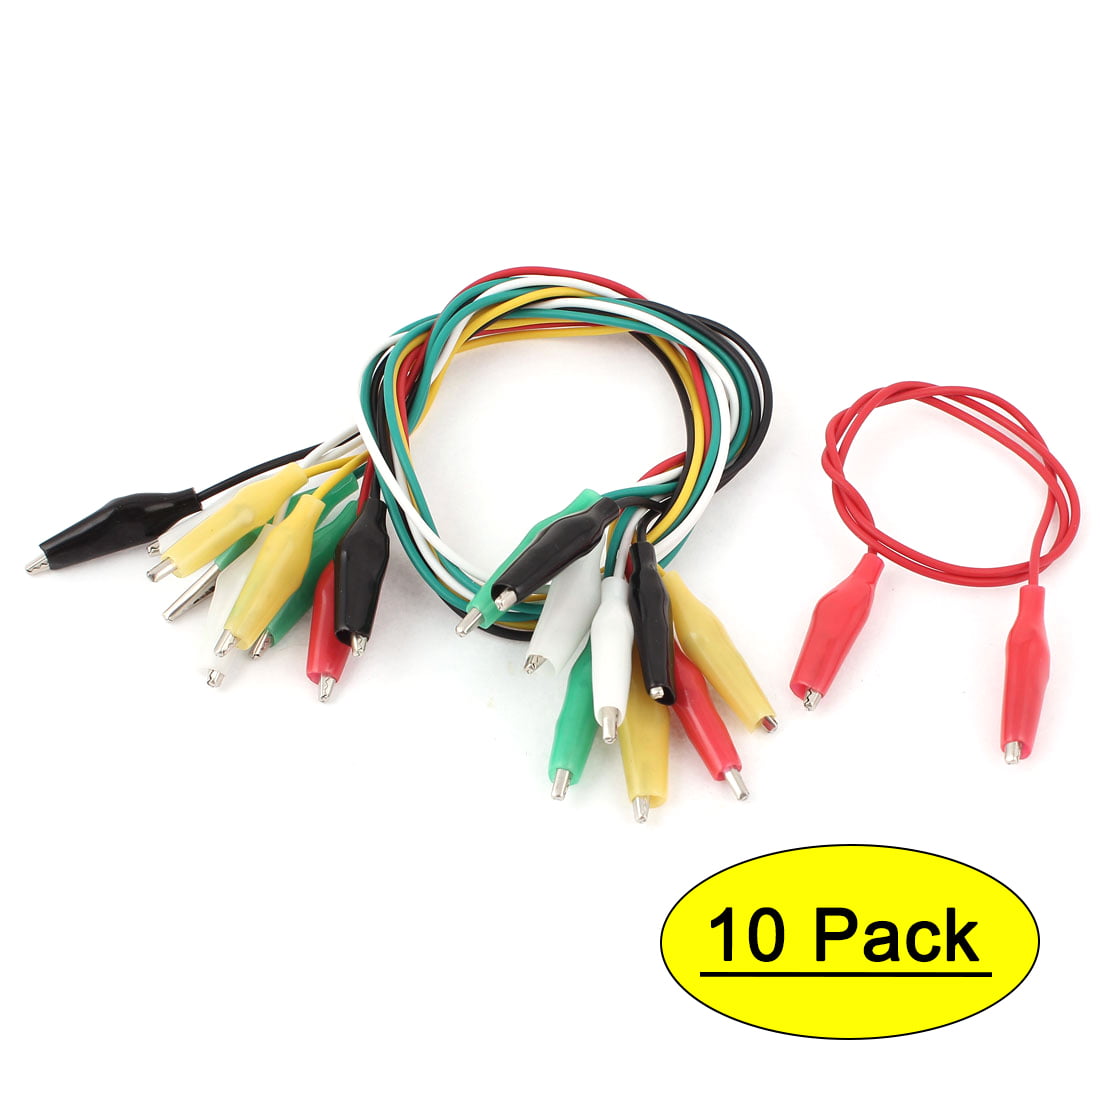 10pcs 50cm Double-ended Clips Crocodile Cable Alligator Jumper Wire Test Leads 